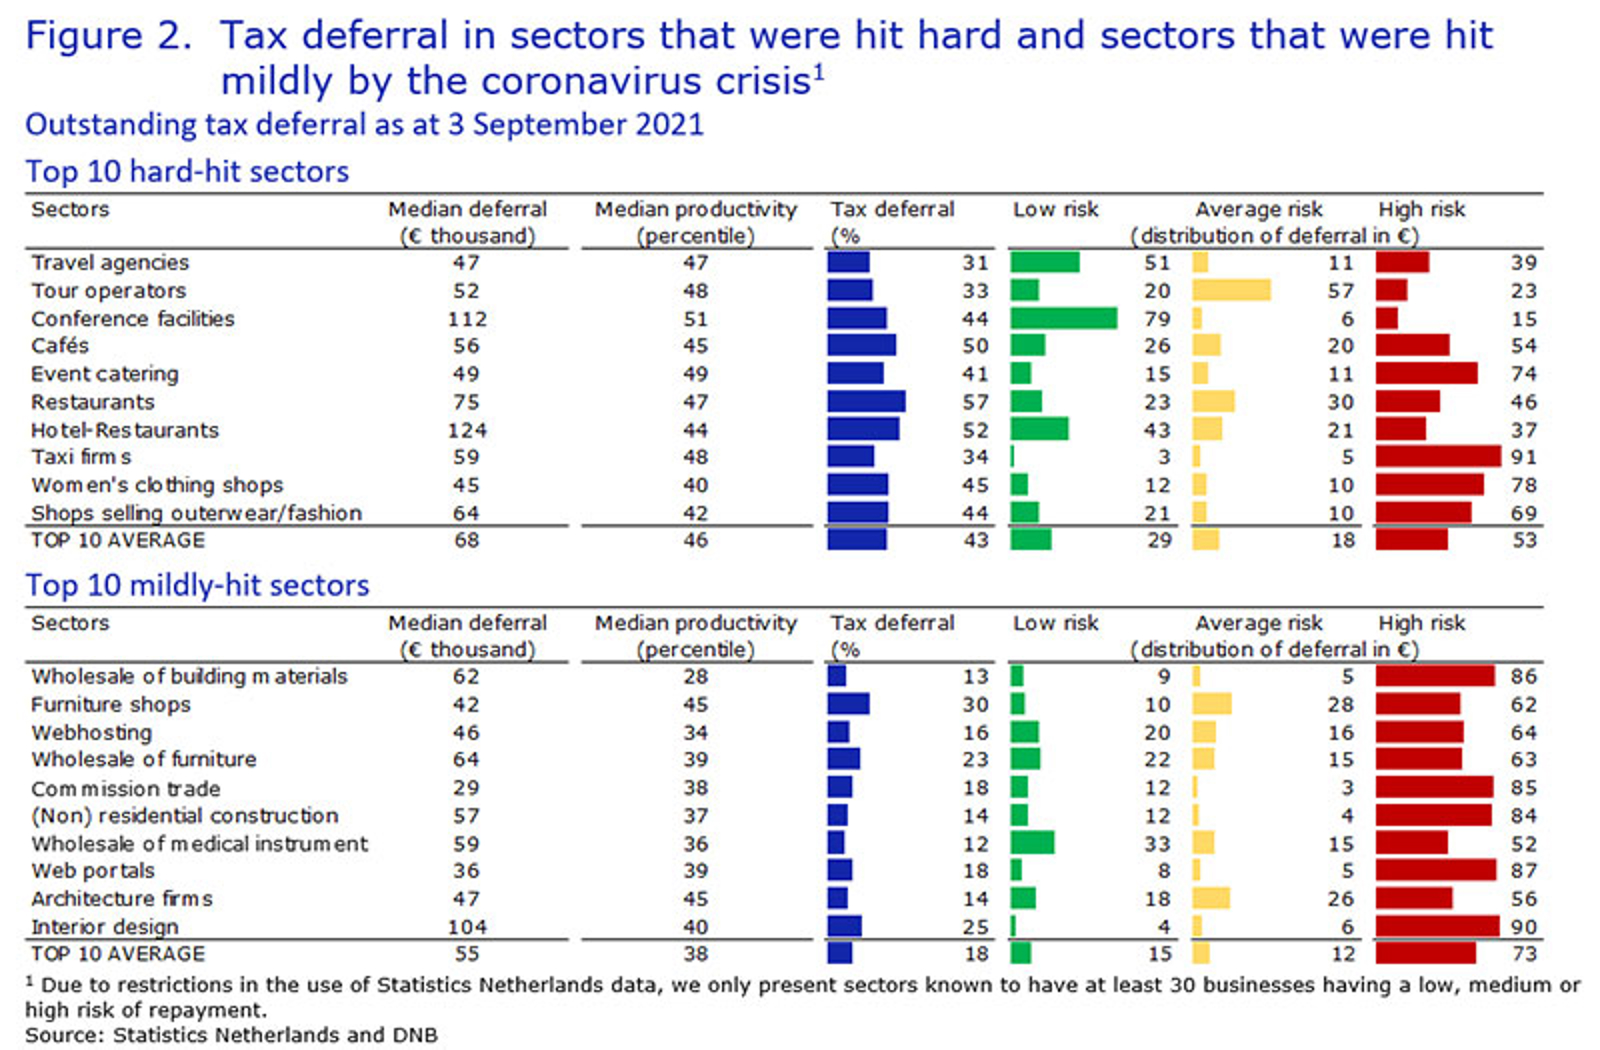 Tax deferral in sectors that were hit hard and sectors that were hit mildly by the coronavirus crisis